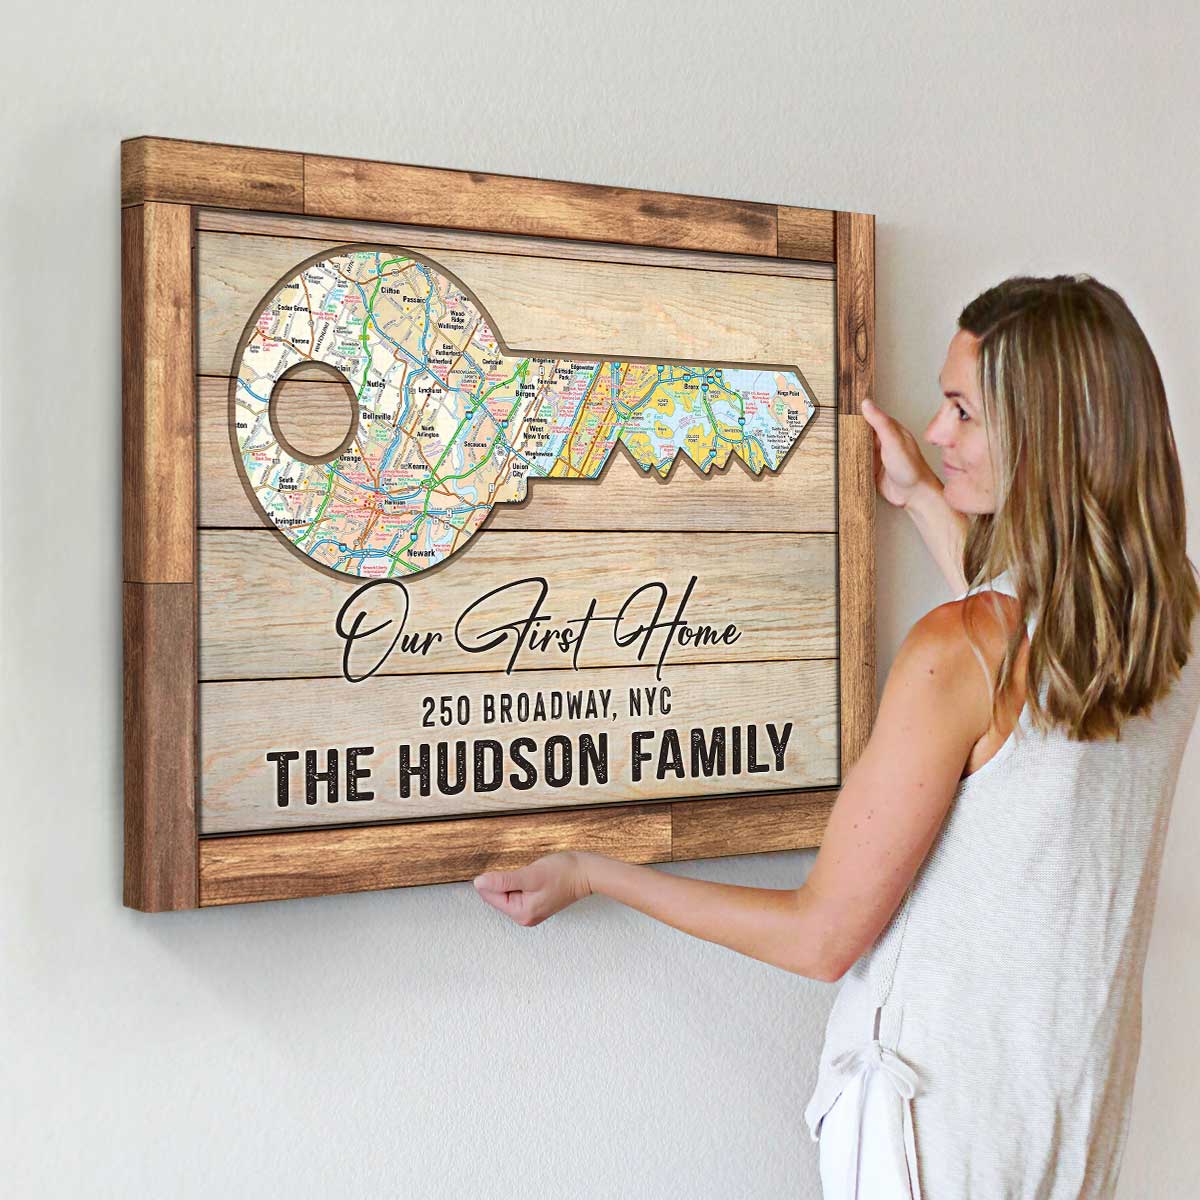 https://benicee.com/wp-content/uploads/2022/09/New-Home-Key-Map-Wall-Art-Christmas-Gifts-For-New-Homeowners-New-Home-Gift-Ideas-2.jpg